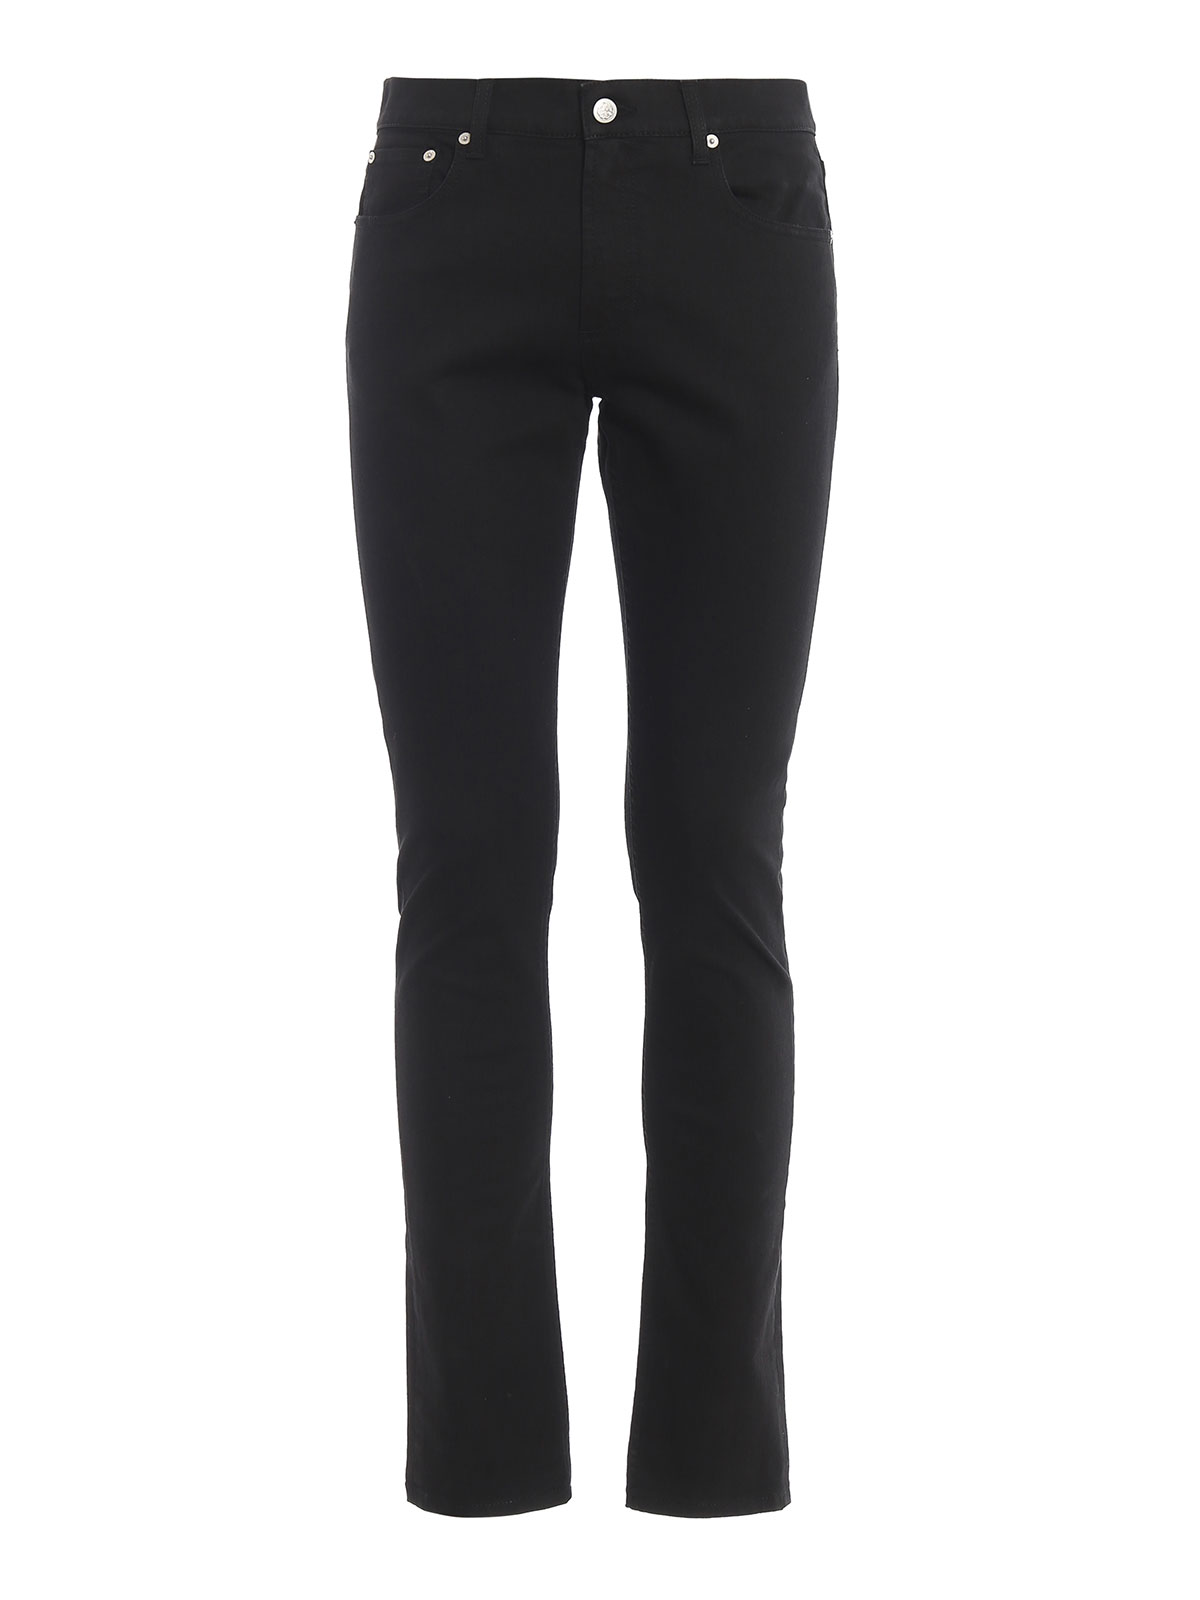 Skinny jeans Alexander Mcqueen - Total black jeans with red embroidery ...